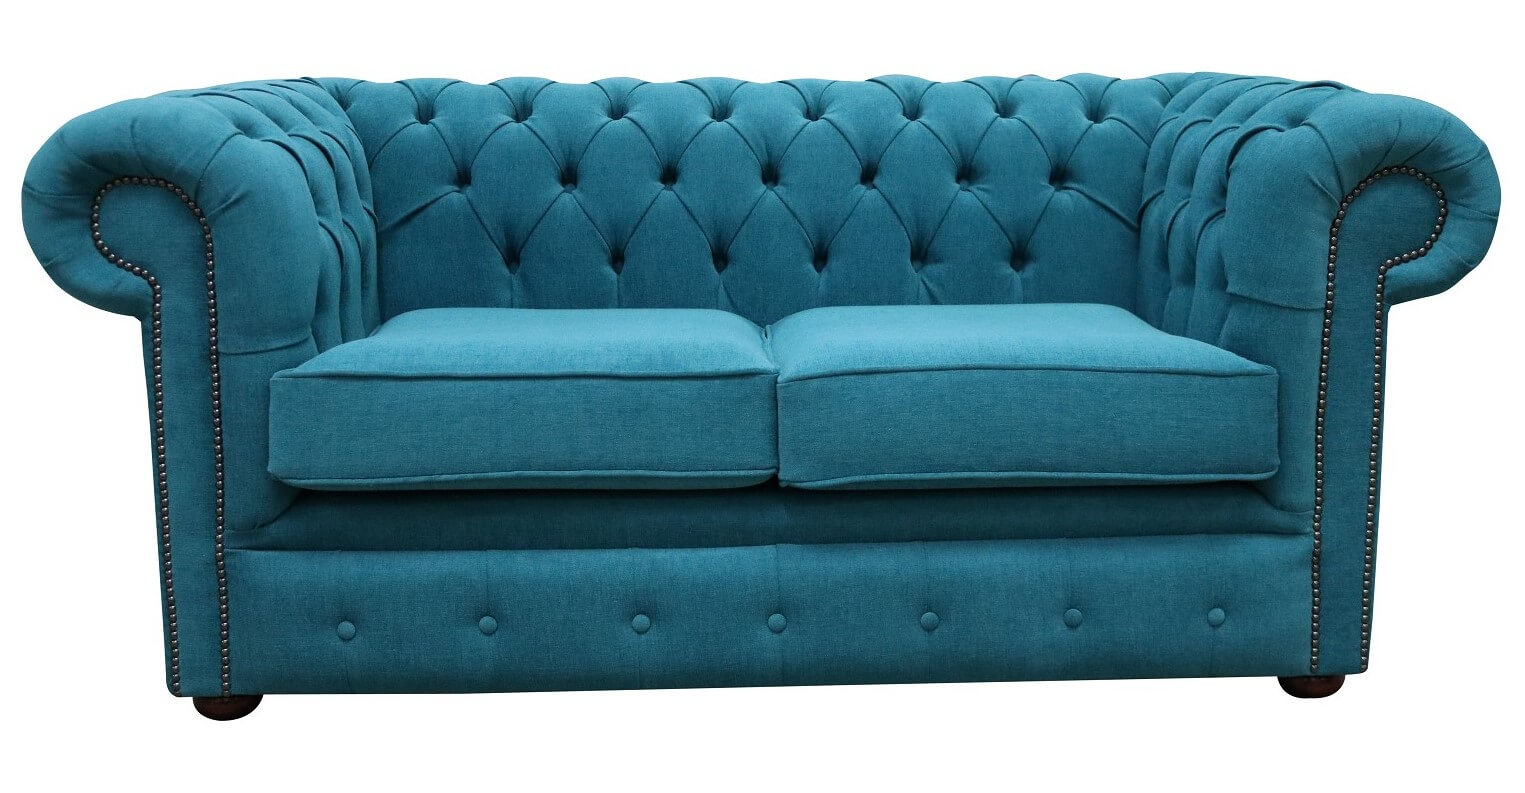 Authentic Elegance Deciphering the Essence of a True Chesterfield Sofa  %Post Title